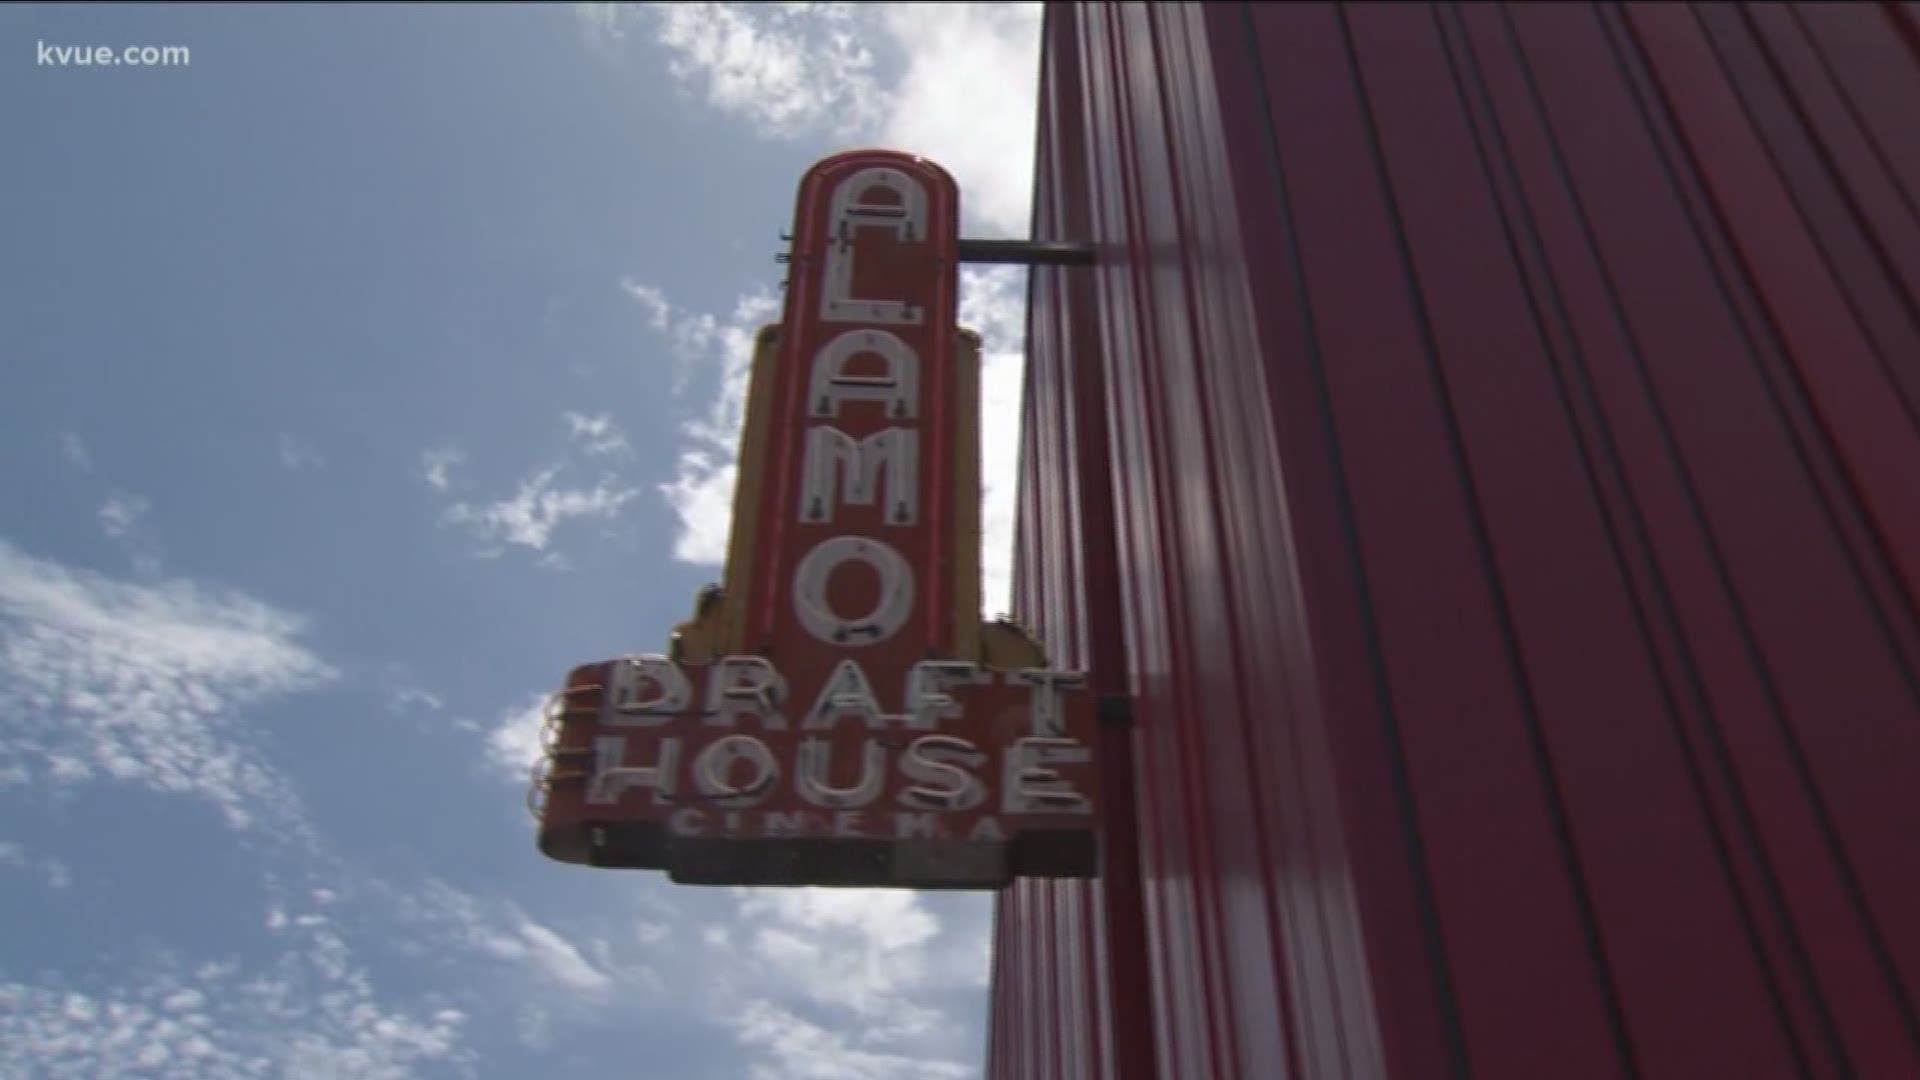 Alamo Drafthouse is expected to launch its season pass subscription plan by the end of this year.